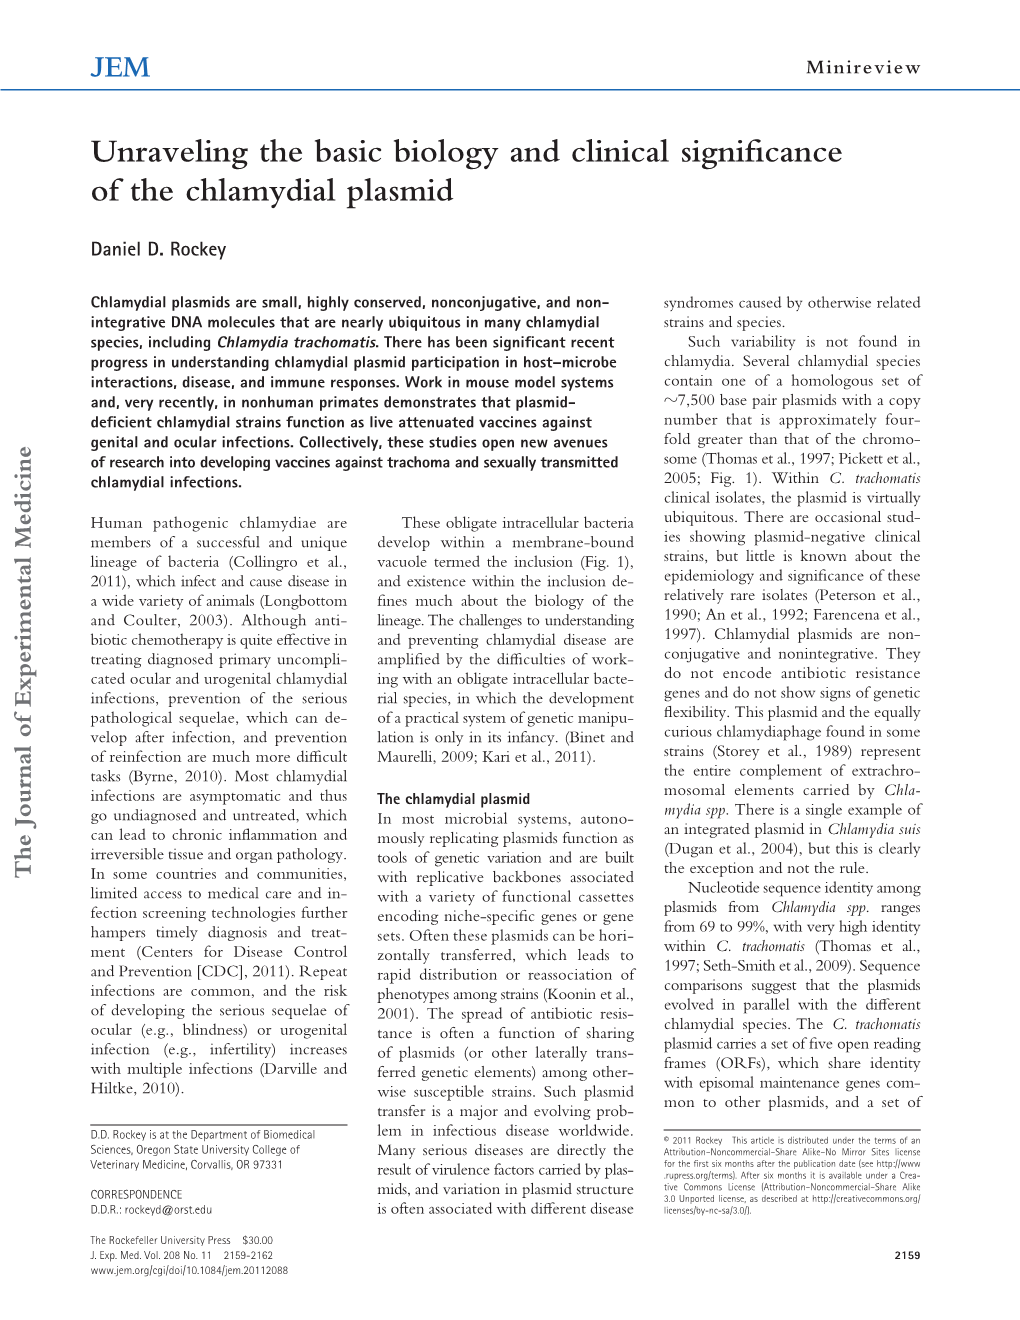 Unraveling the Basic Biology and Clinical Significance of the Chlamydial Plasmid